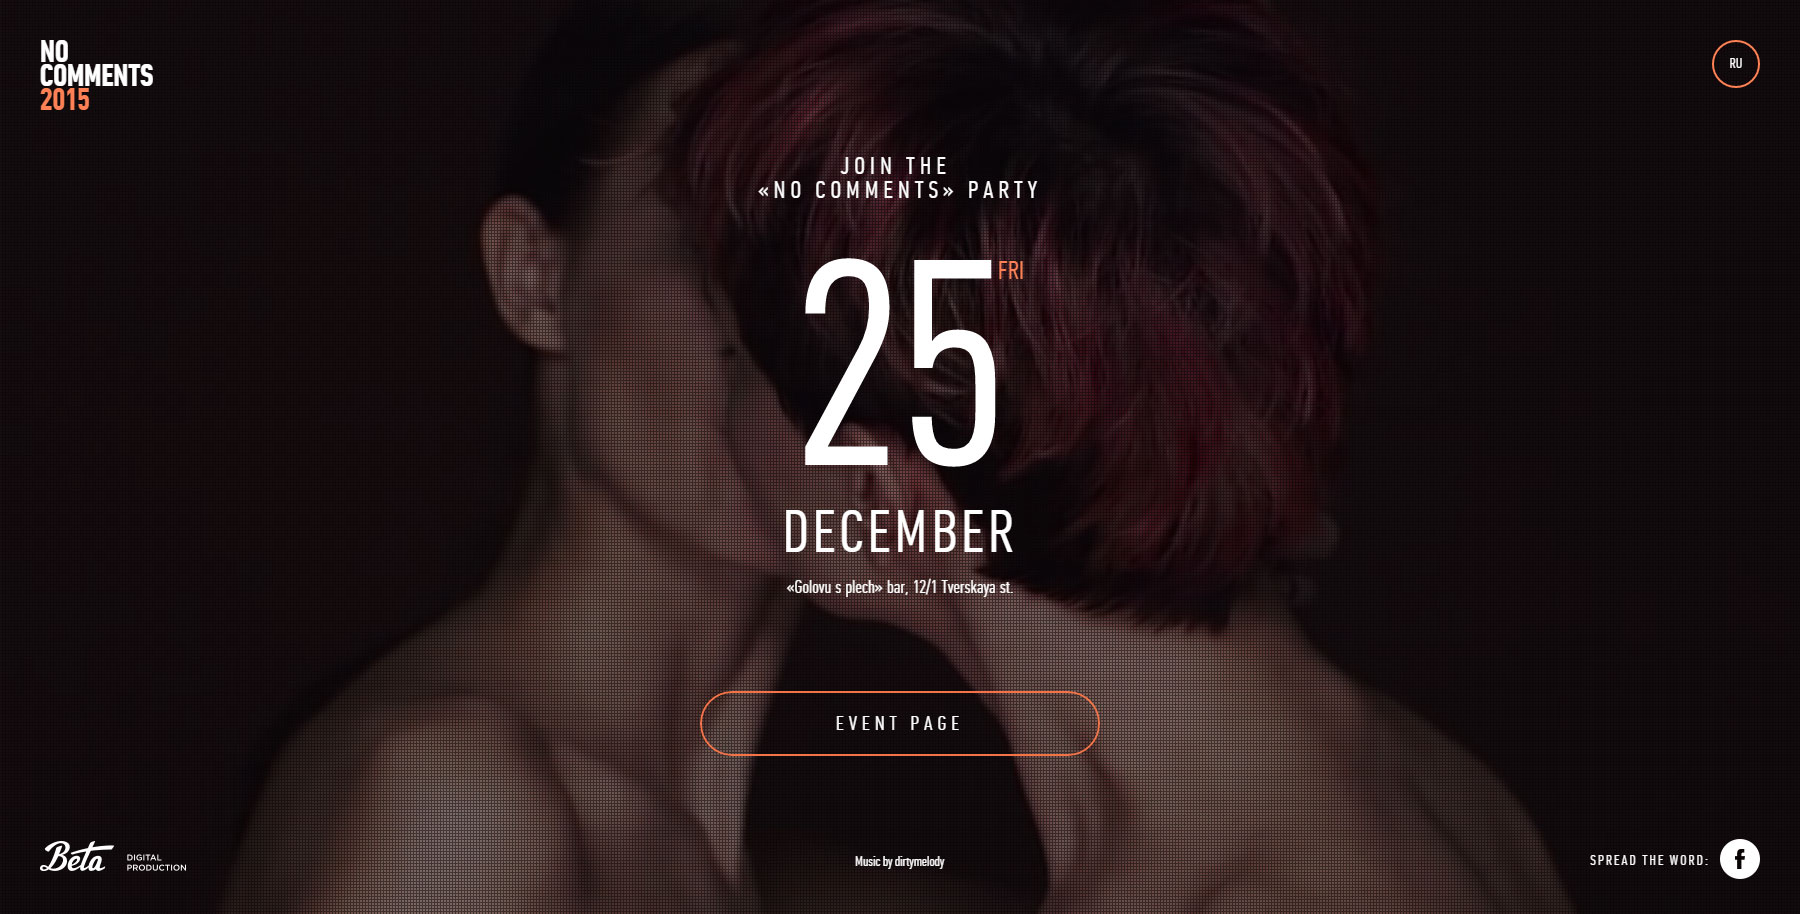 No comments 2015 - Website of the Day